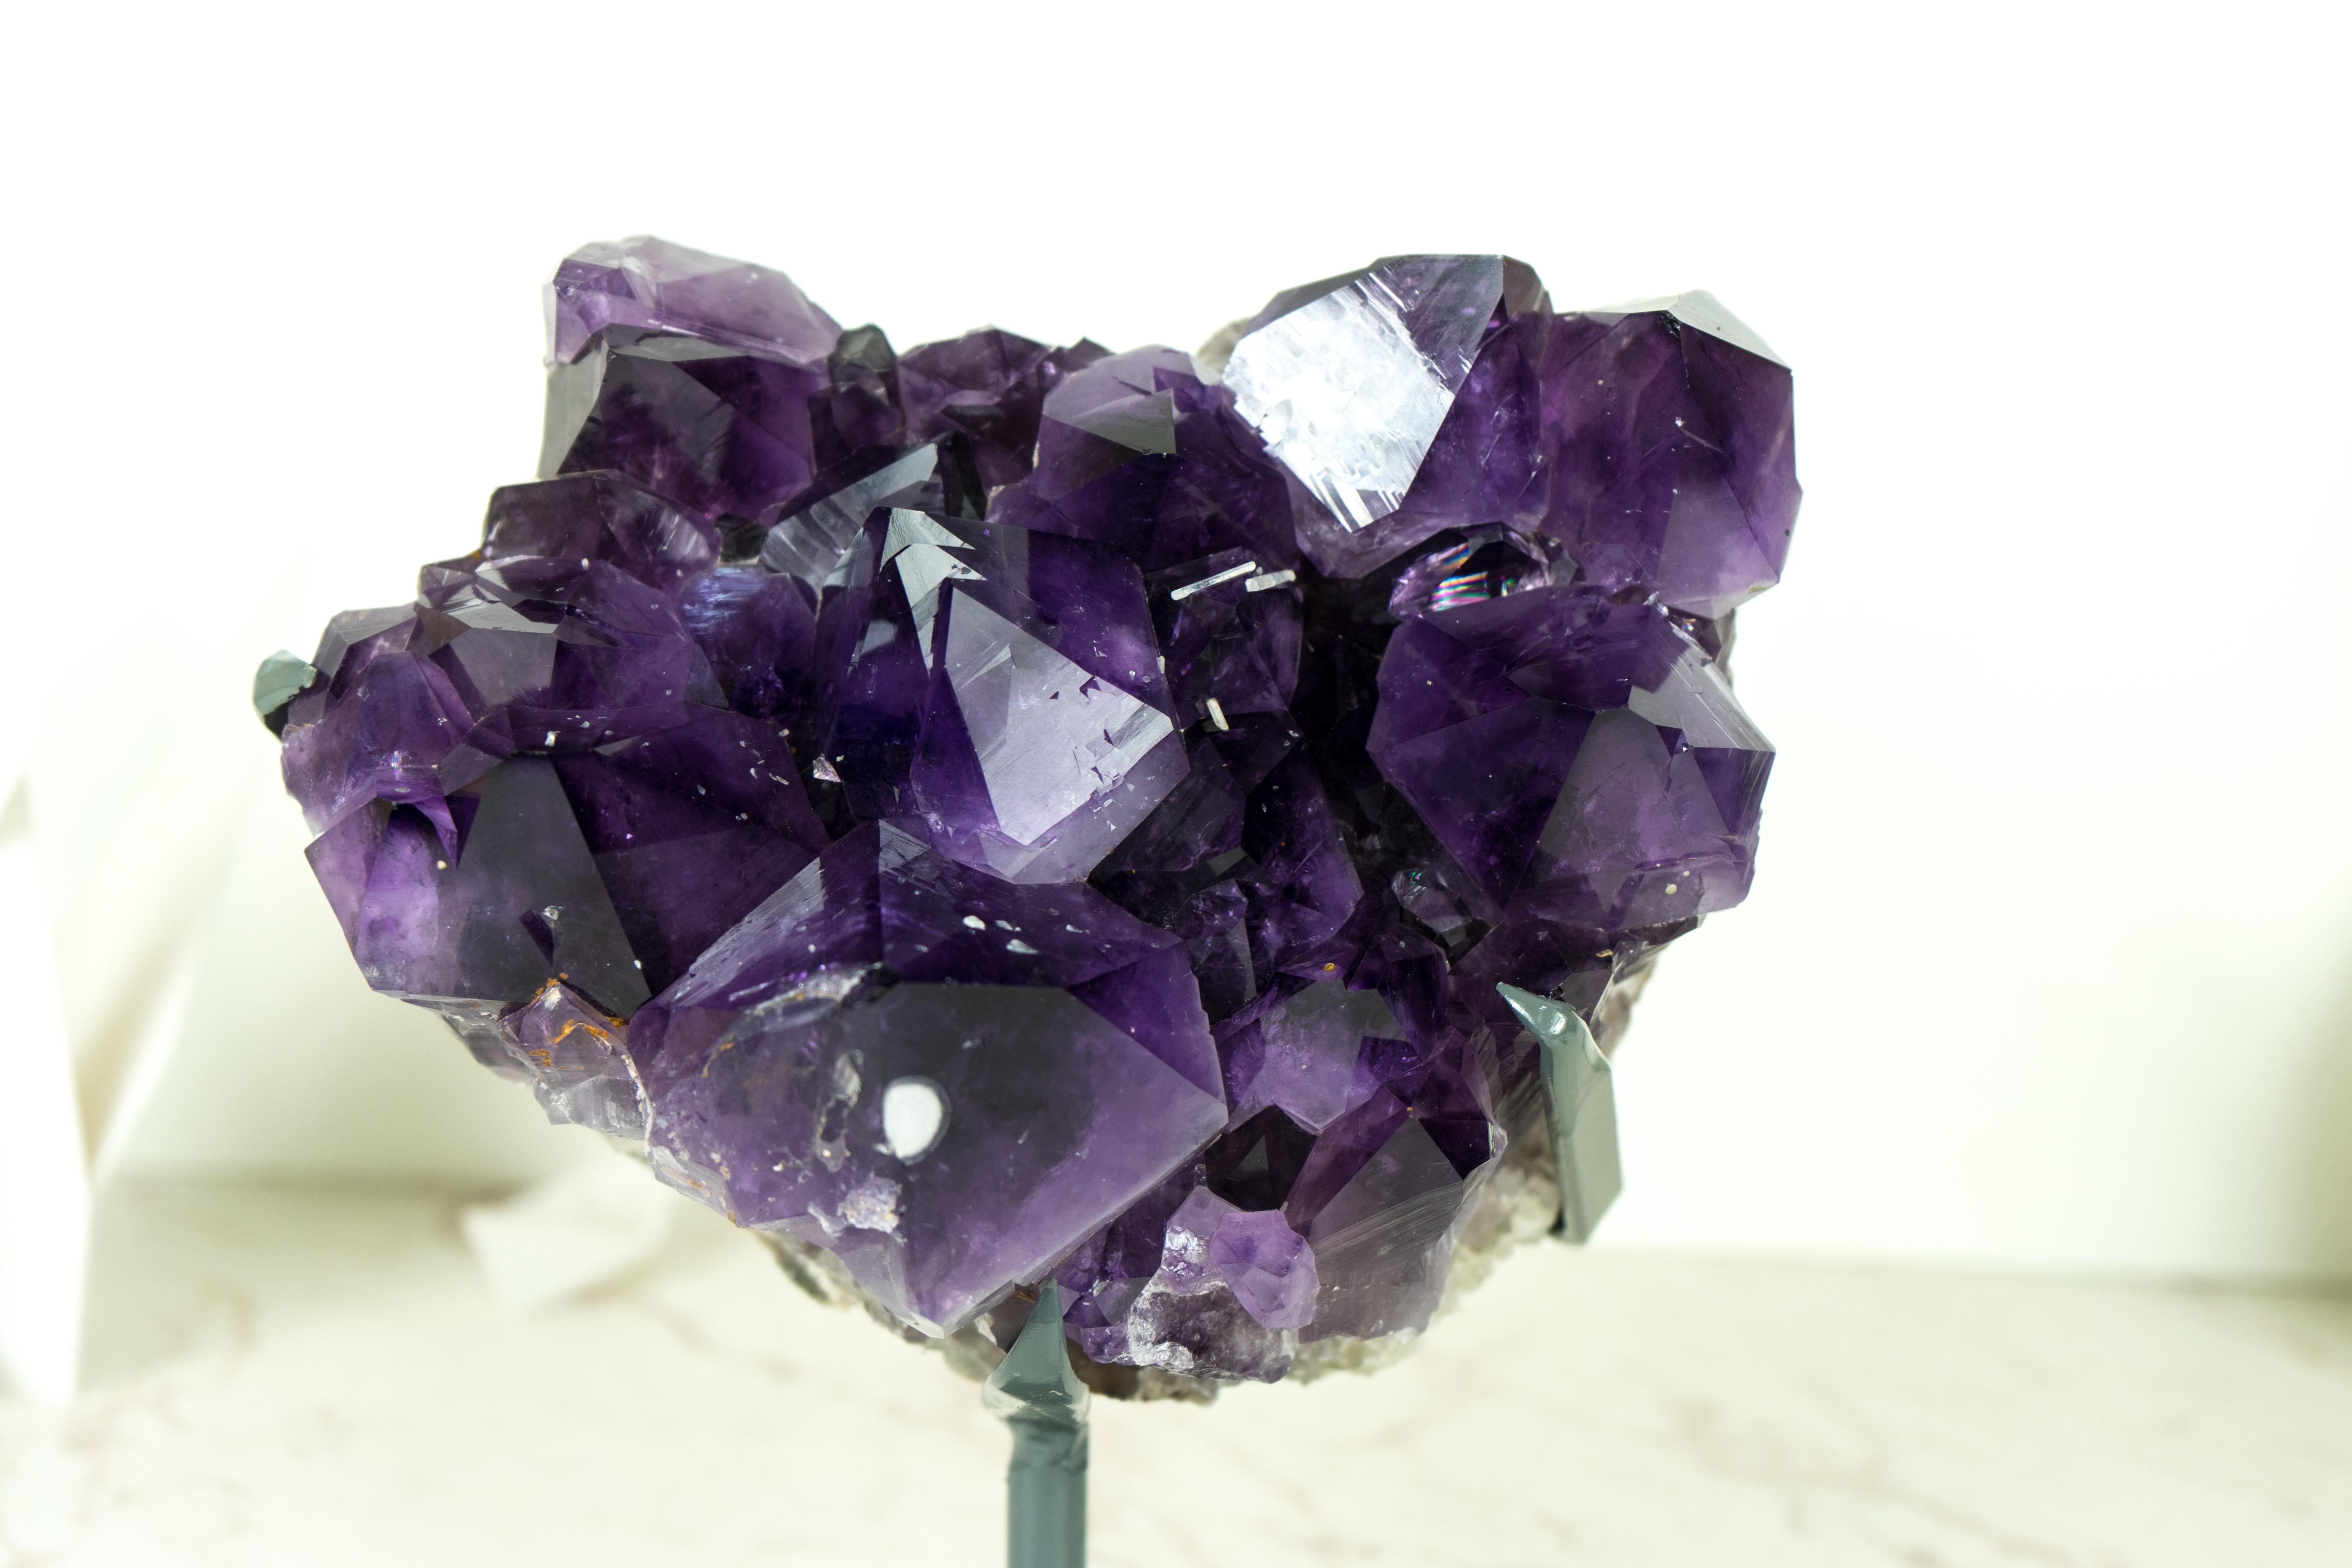 An Amethyst Cluster with gorgeous aesthetics, bringing the deepest tone of Purple of any Amethyst, and rare cristobalite inclusions, this Amethyst Cluster elevates every aspect of Brazilian Amethyst and is ready to become a conversation starter in